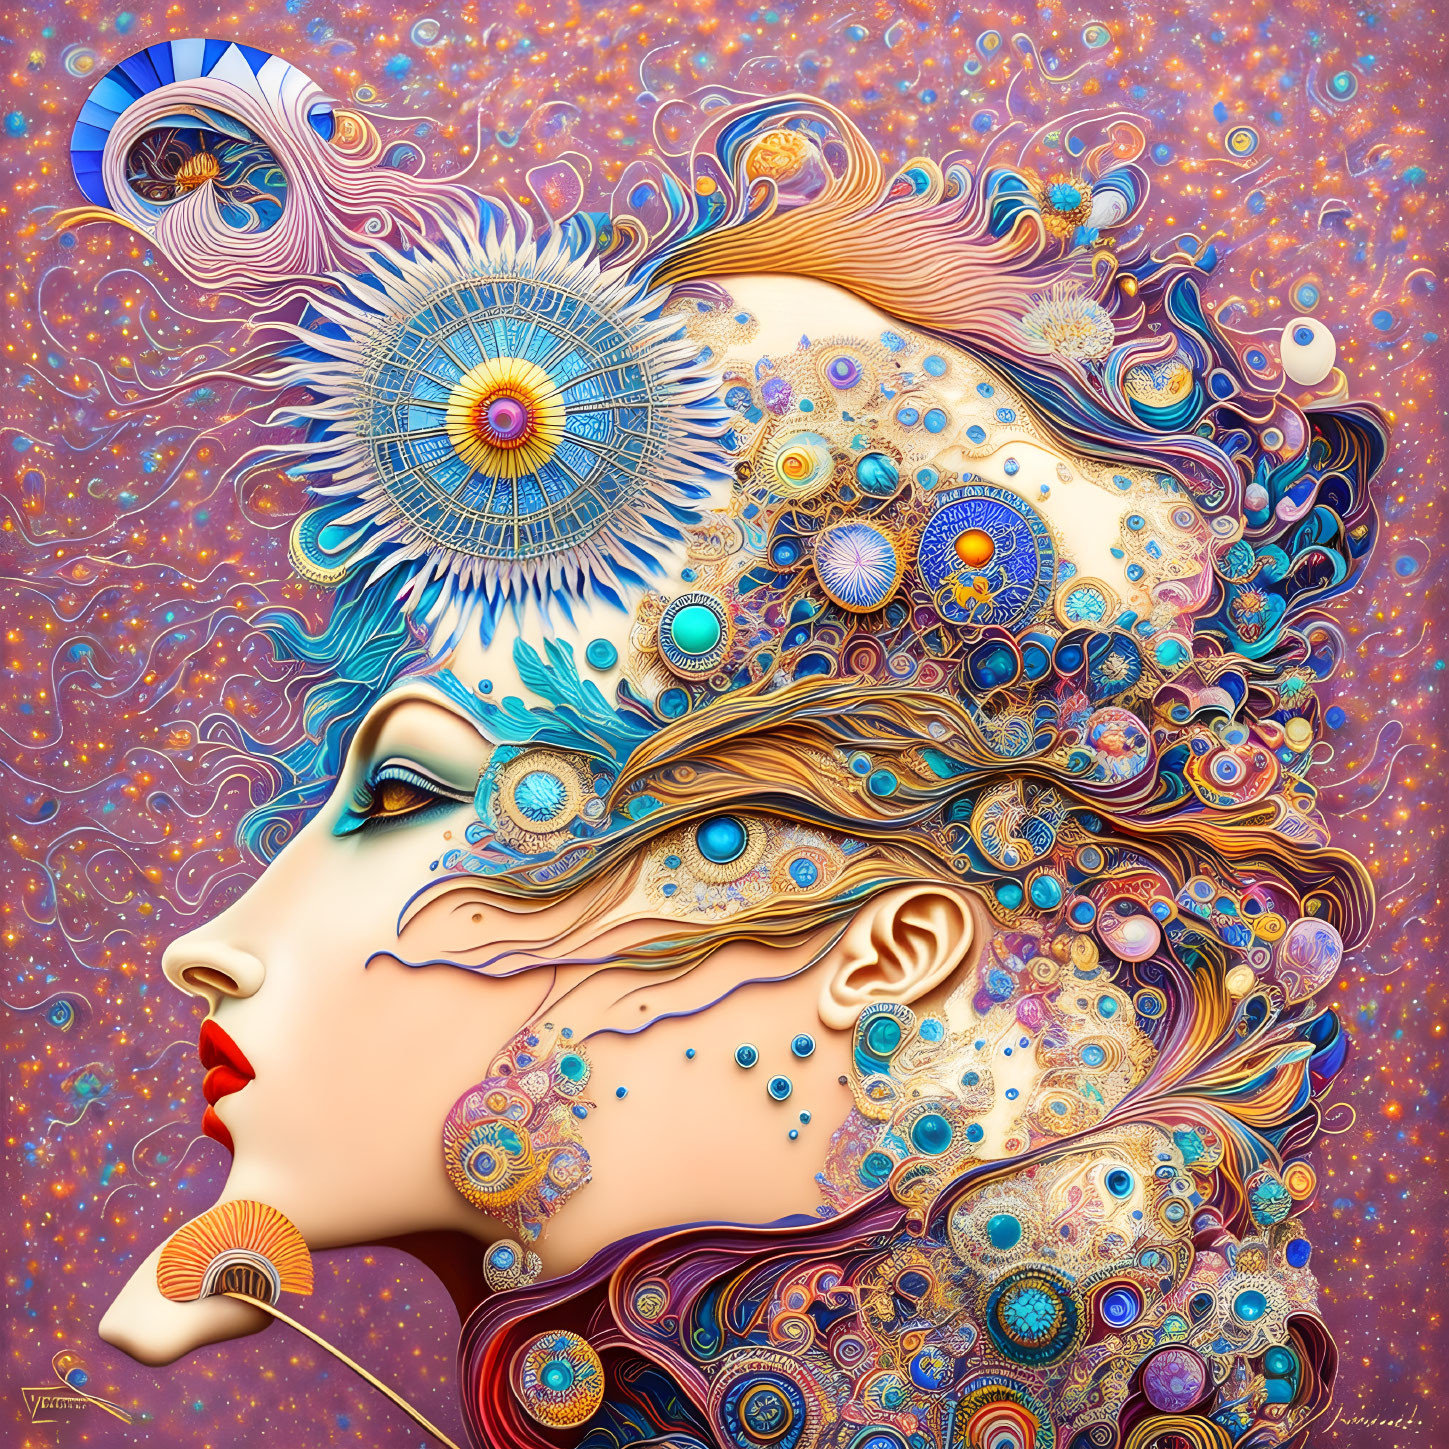 Colorful psychedelic portrait of a woman with intricate patterns and celestial motifs